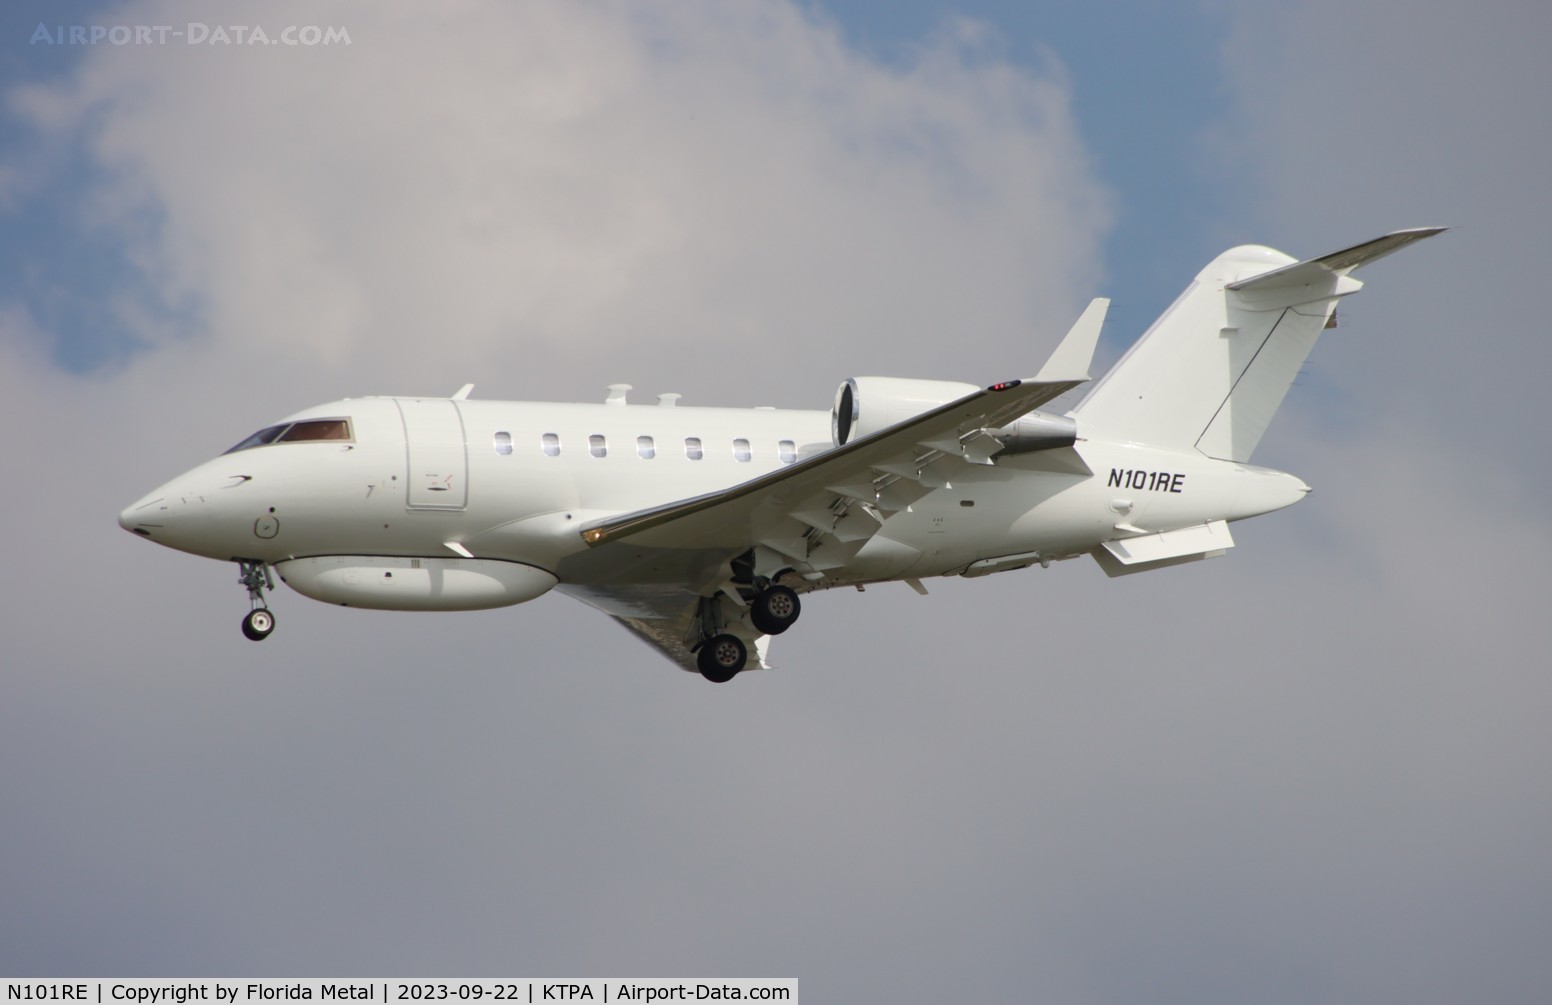 N101RE, 2017 Bombardier CL-600-2B16 Challenger 650 C/N 6101, Challenger 650 zx